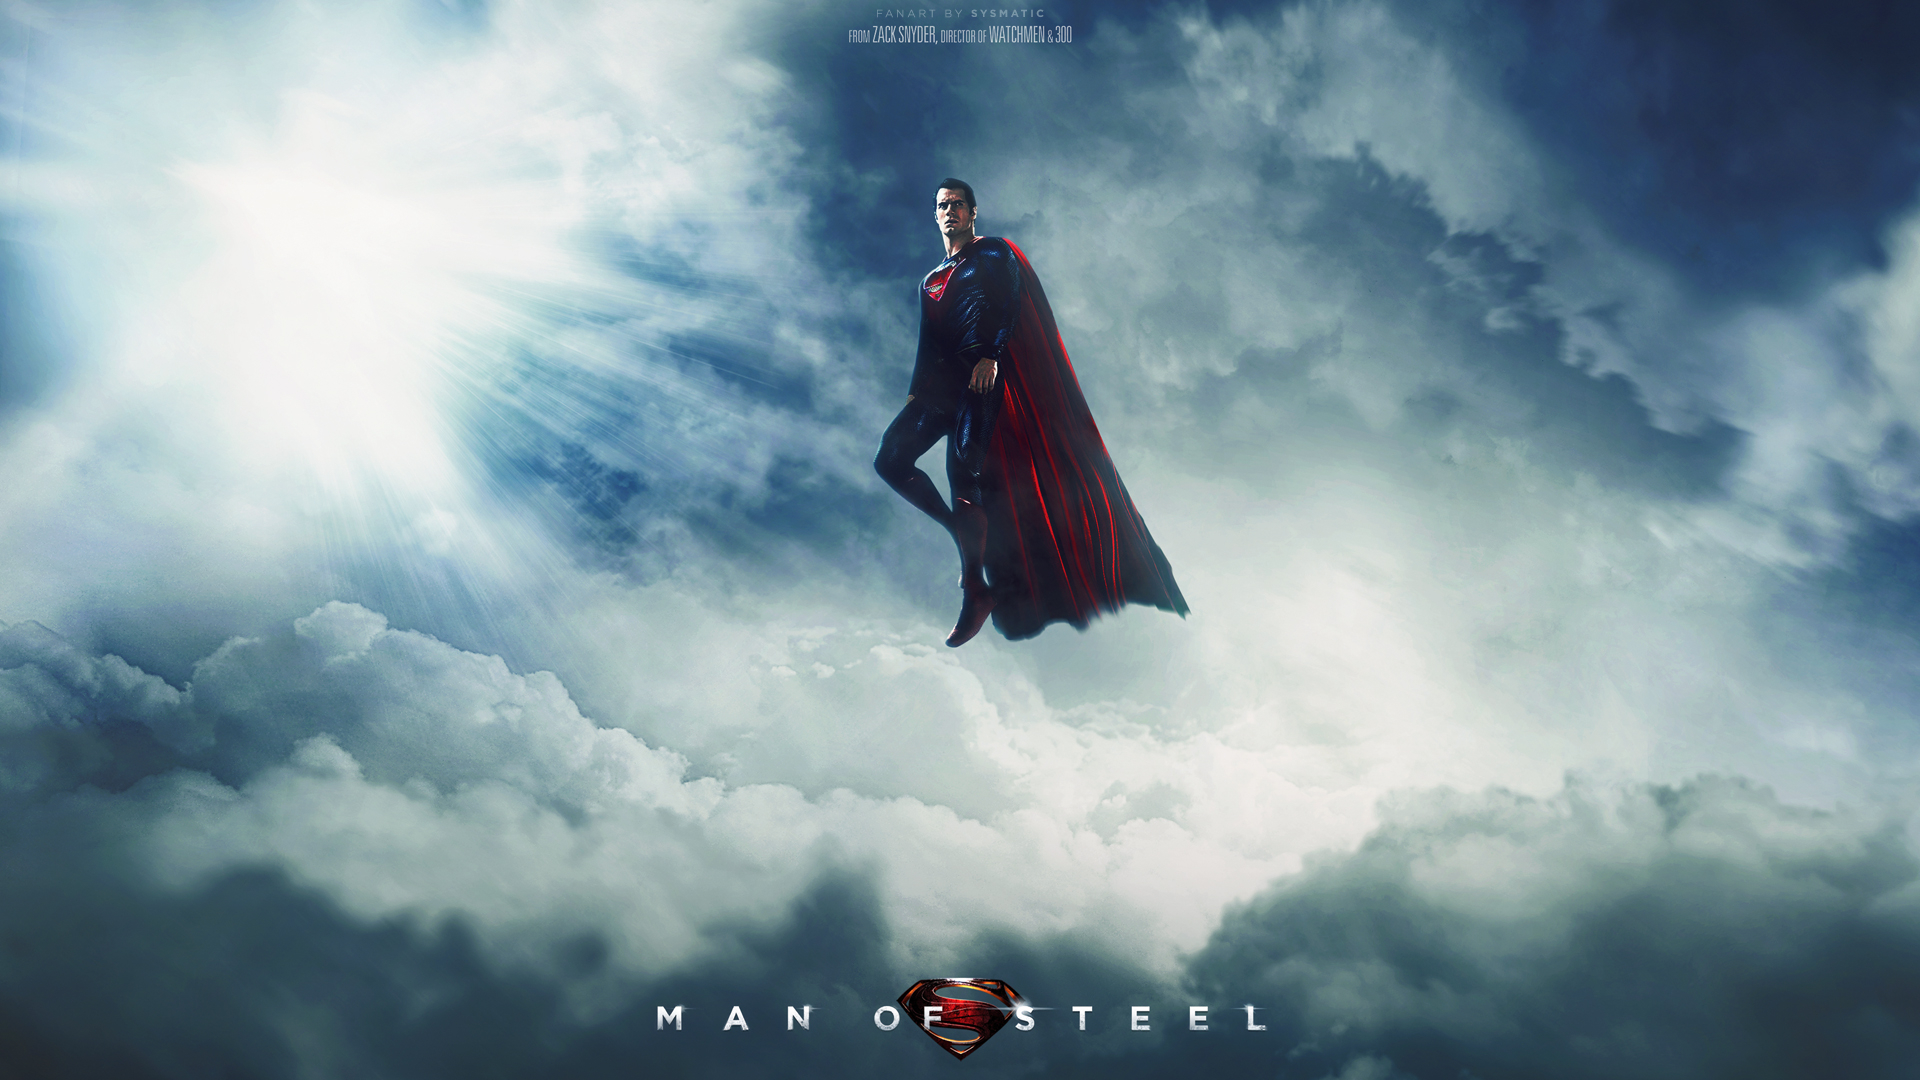 1920x1080 90+ Man Of Steel HD Wallpapers and Backgrounds